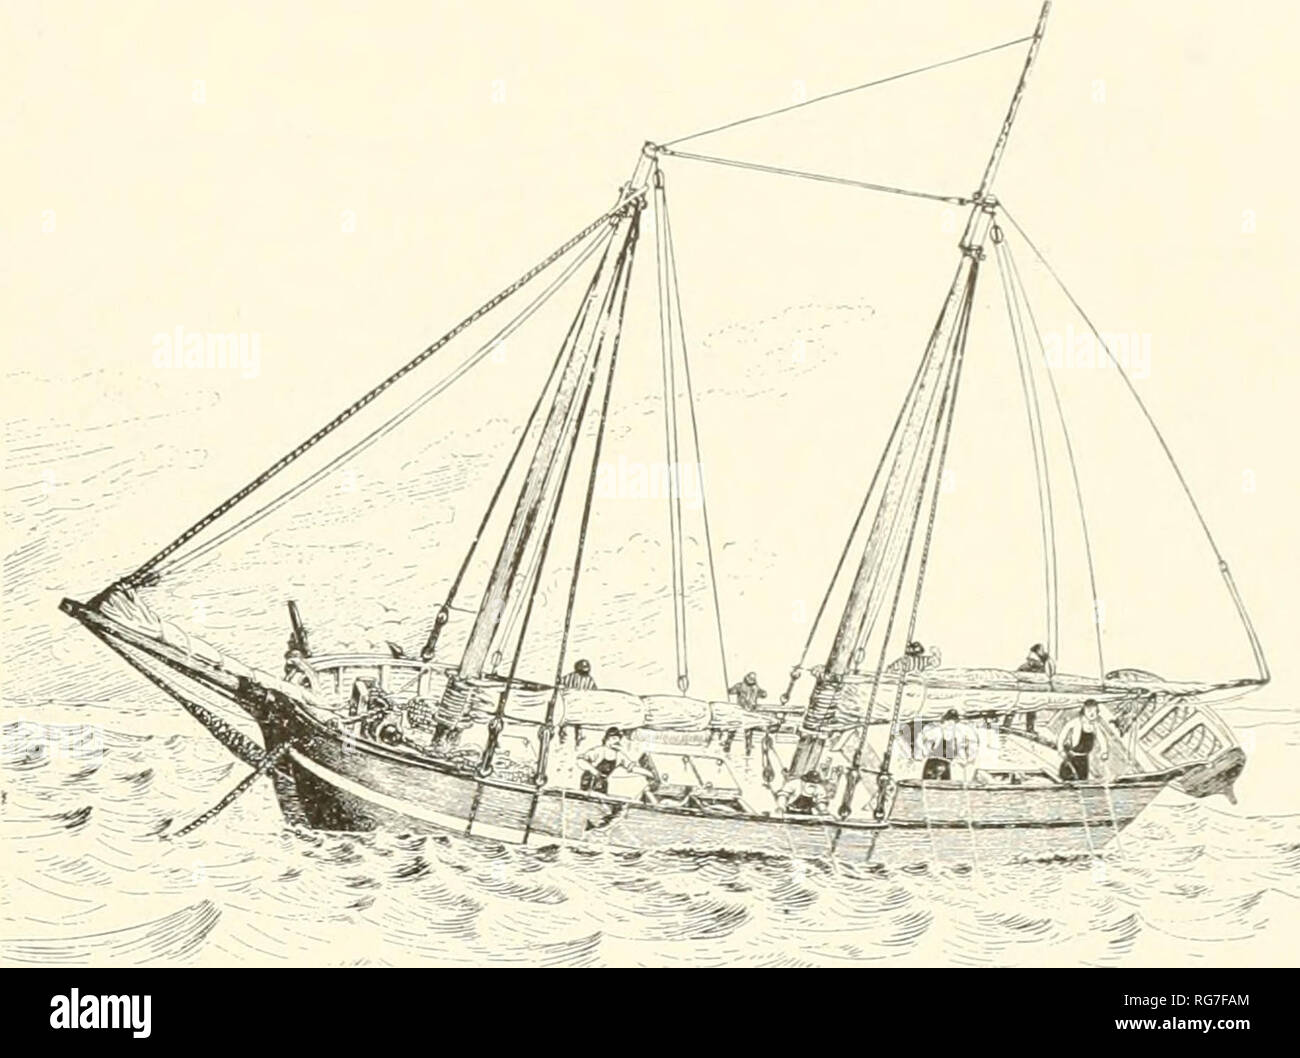 . Bulletin - United States National Museum. Science. Old Fashioned Grand Banks cod- fishing schooner with crew hand- line fishing. Vessel is of about 1825. Drawn by H. Elliott under the direction of Capt. J. VV. Col- lins. From G. Brown Goode, The fisheries and fishery industries of the United States, Washington, Govern- ment Printing Office, 1884-87.. thus assumed very great importance. The first effort to produce suitable vessels resulted in a large number of smacks, or schooners having live-wells. As most of these vessels were built on the old, slow model, they did not prove very satisfacto Stock Photo